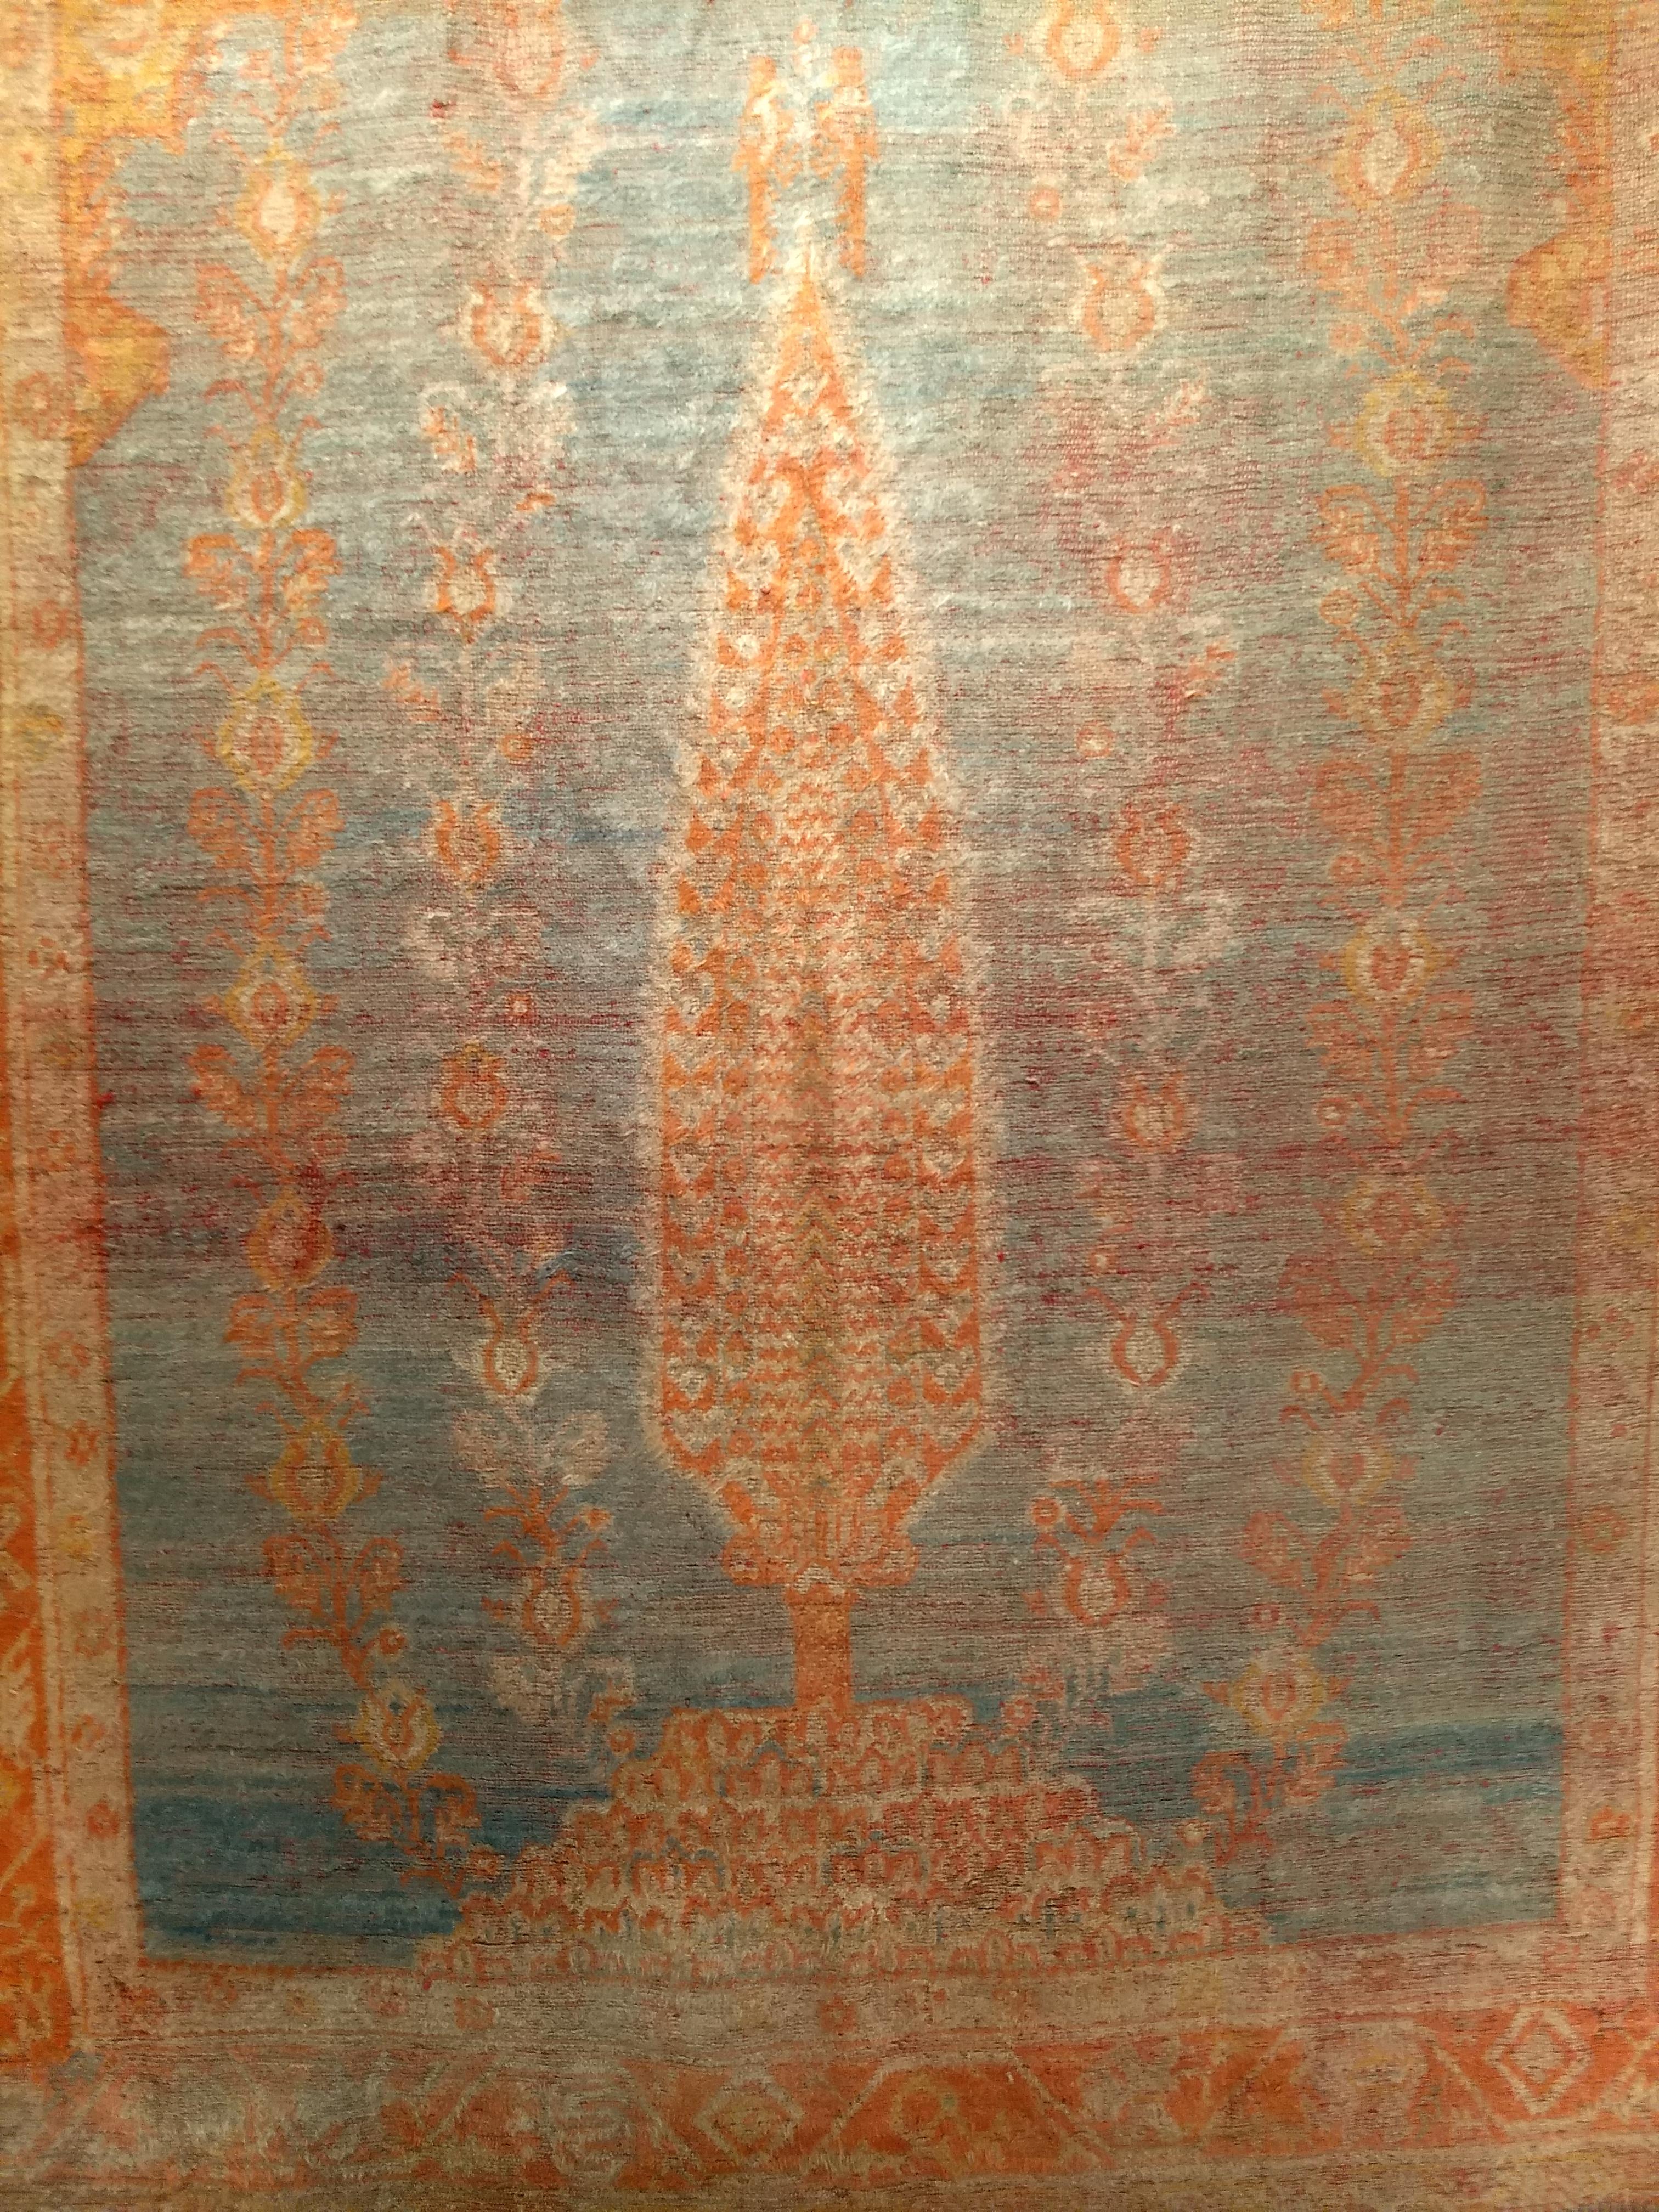 A 19th century Turkish Oushak room size rug in 